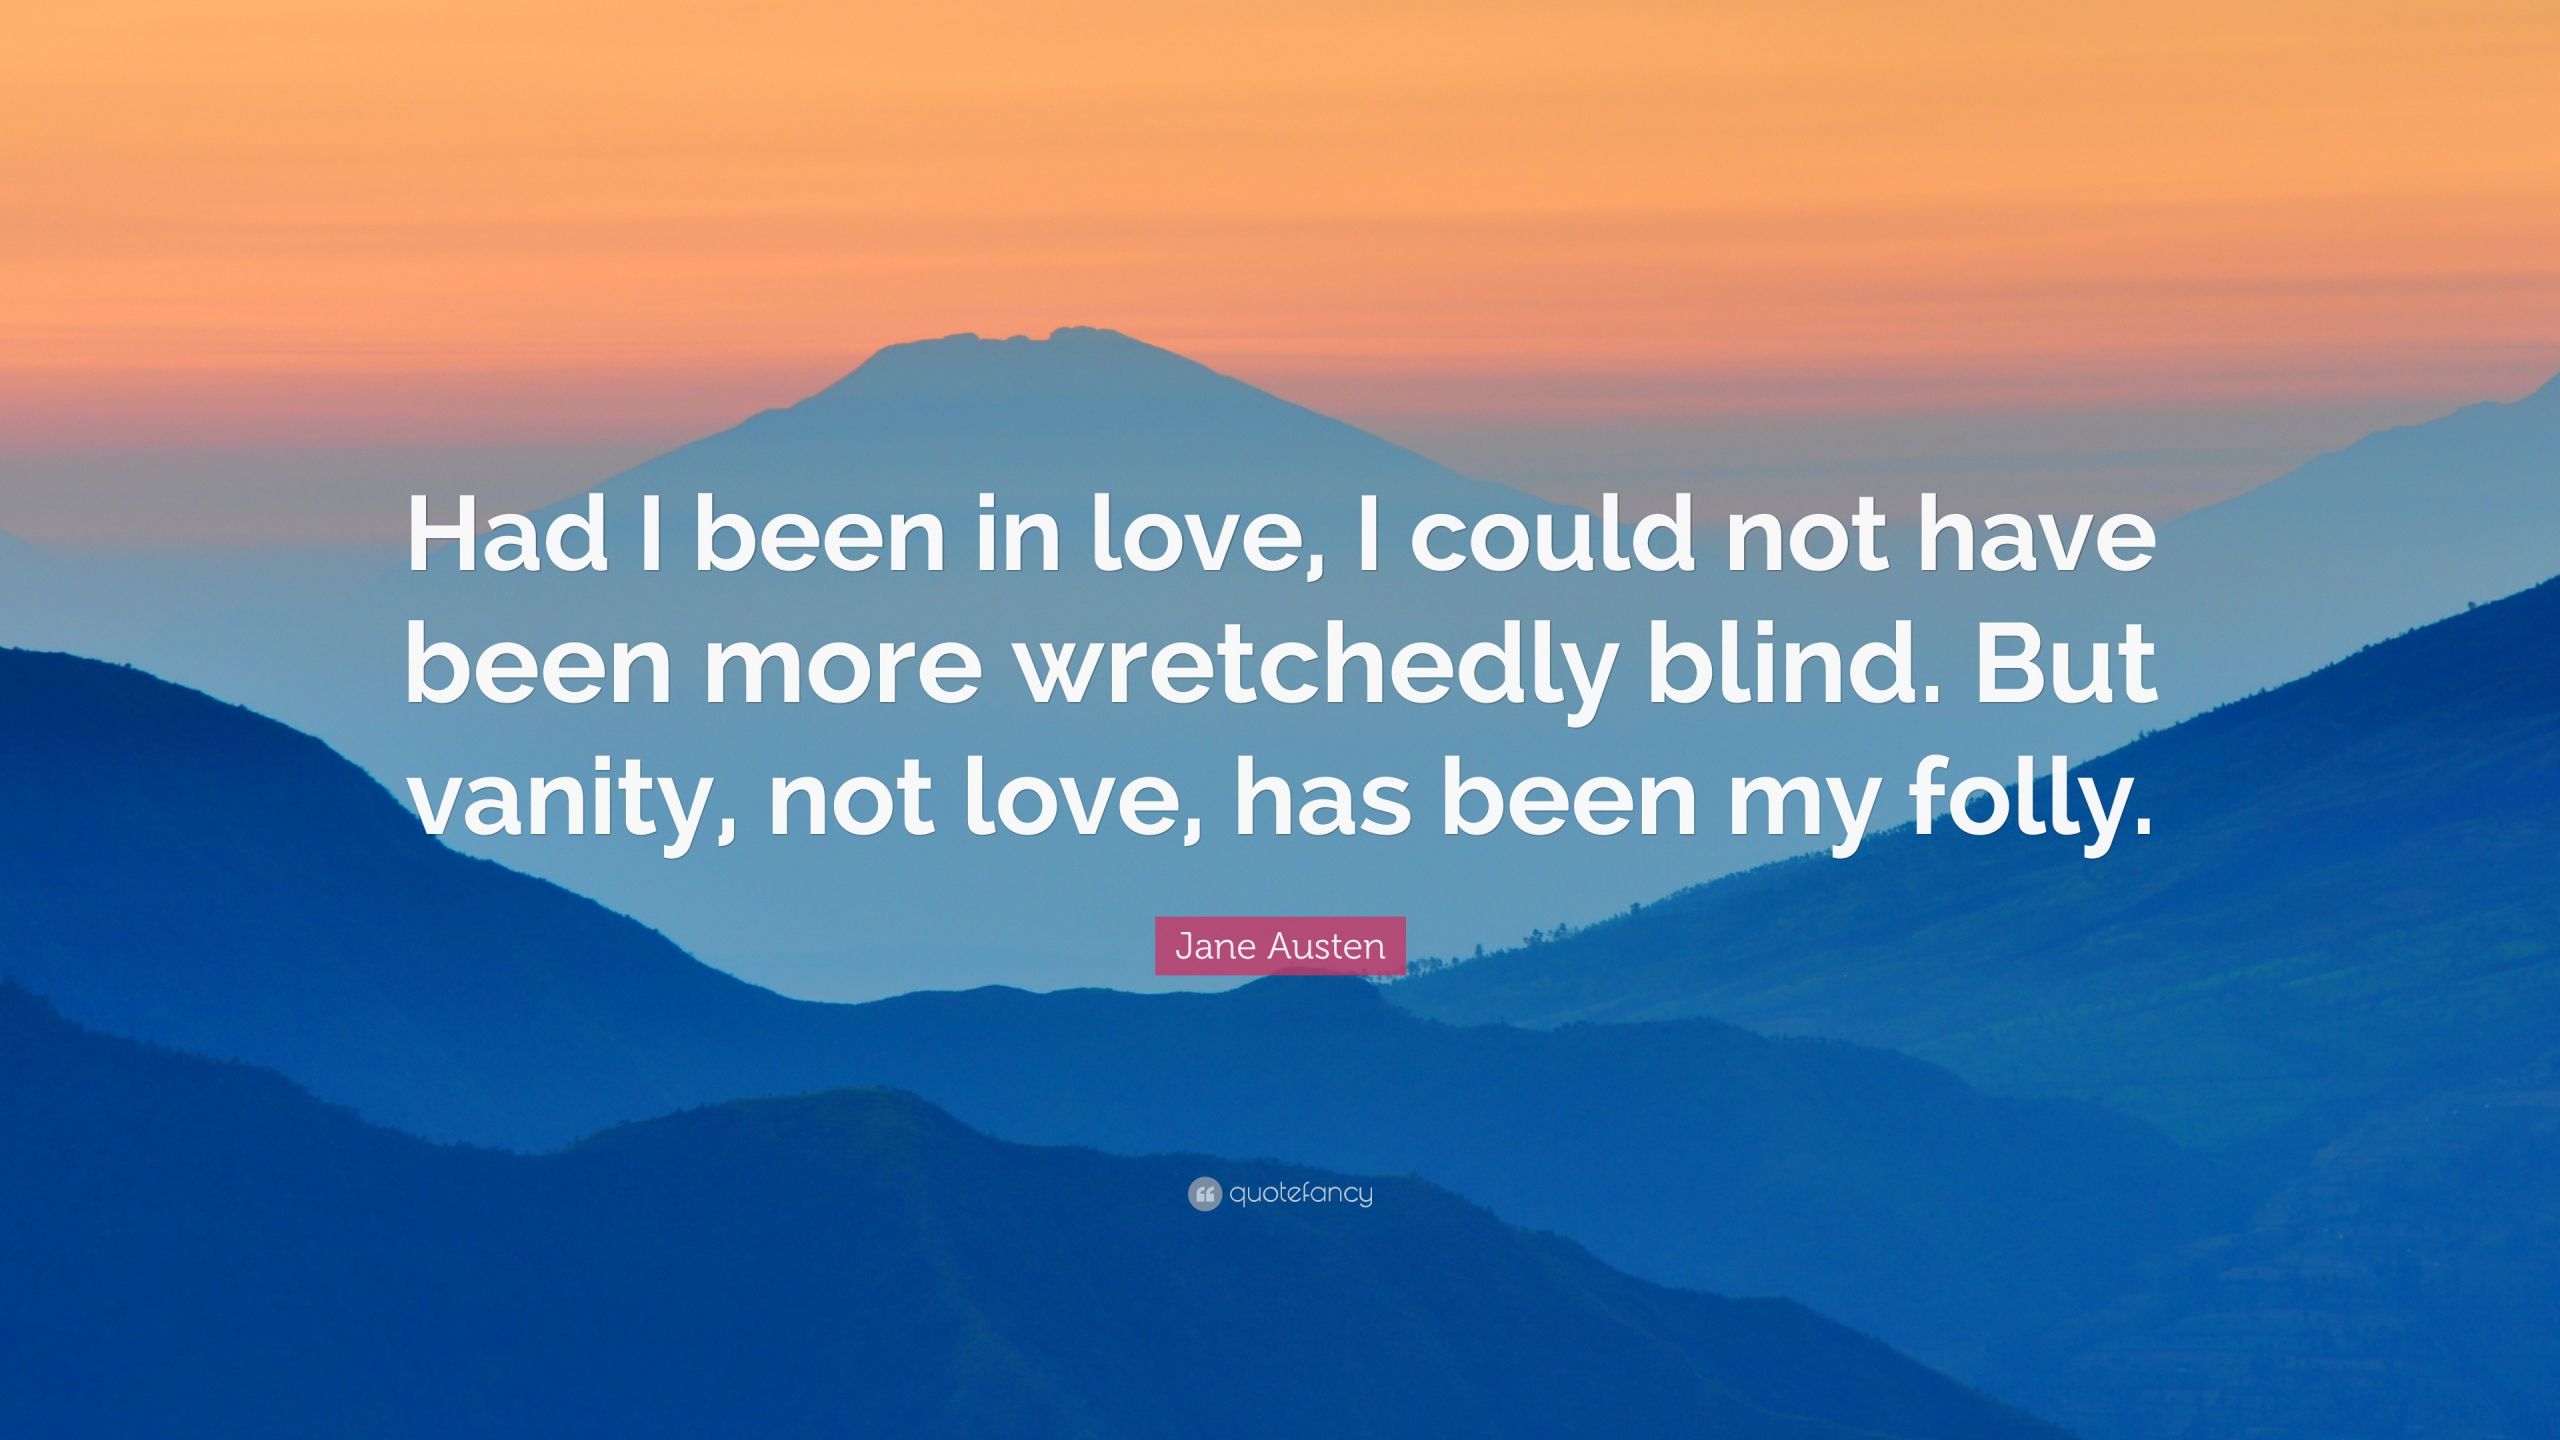 Jane Austen Quotes On Love
 Jane Austen Quote “Had I been in love I could not have